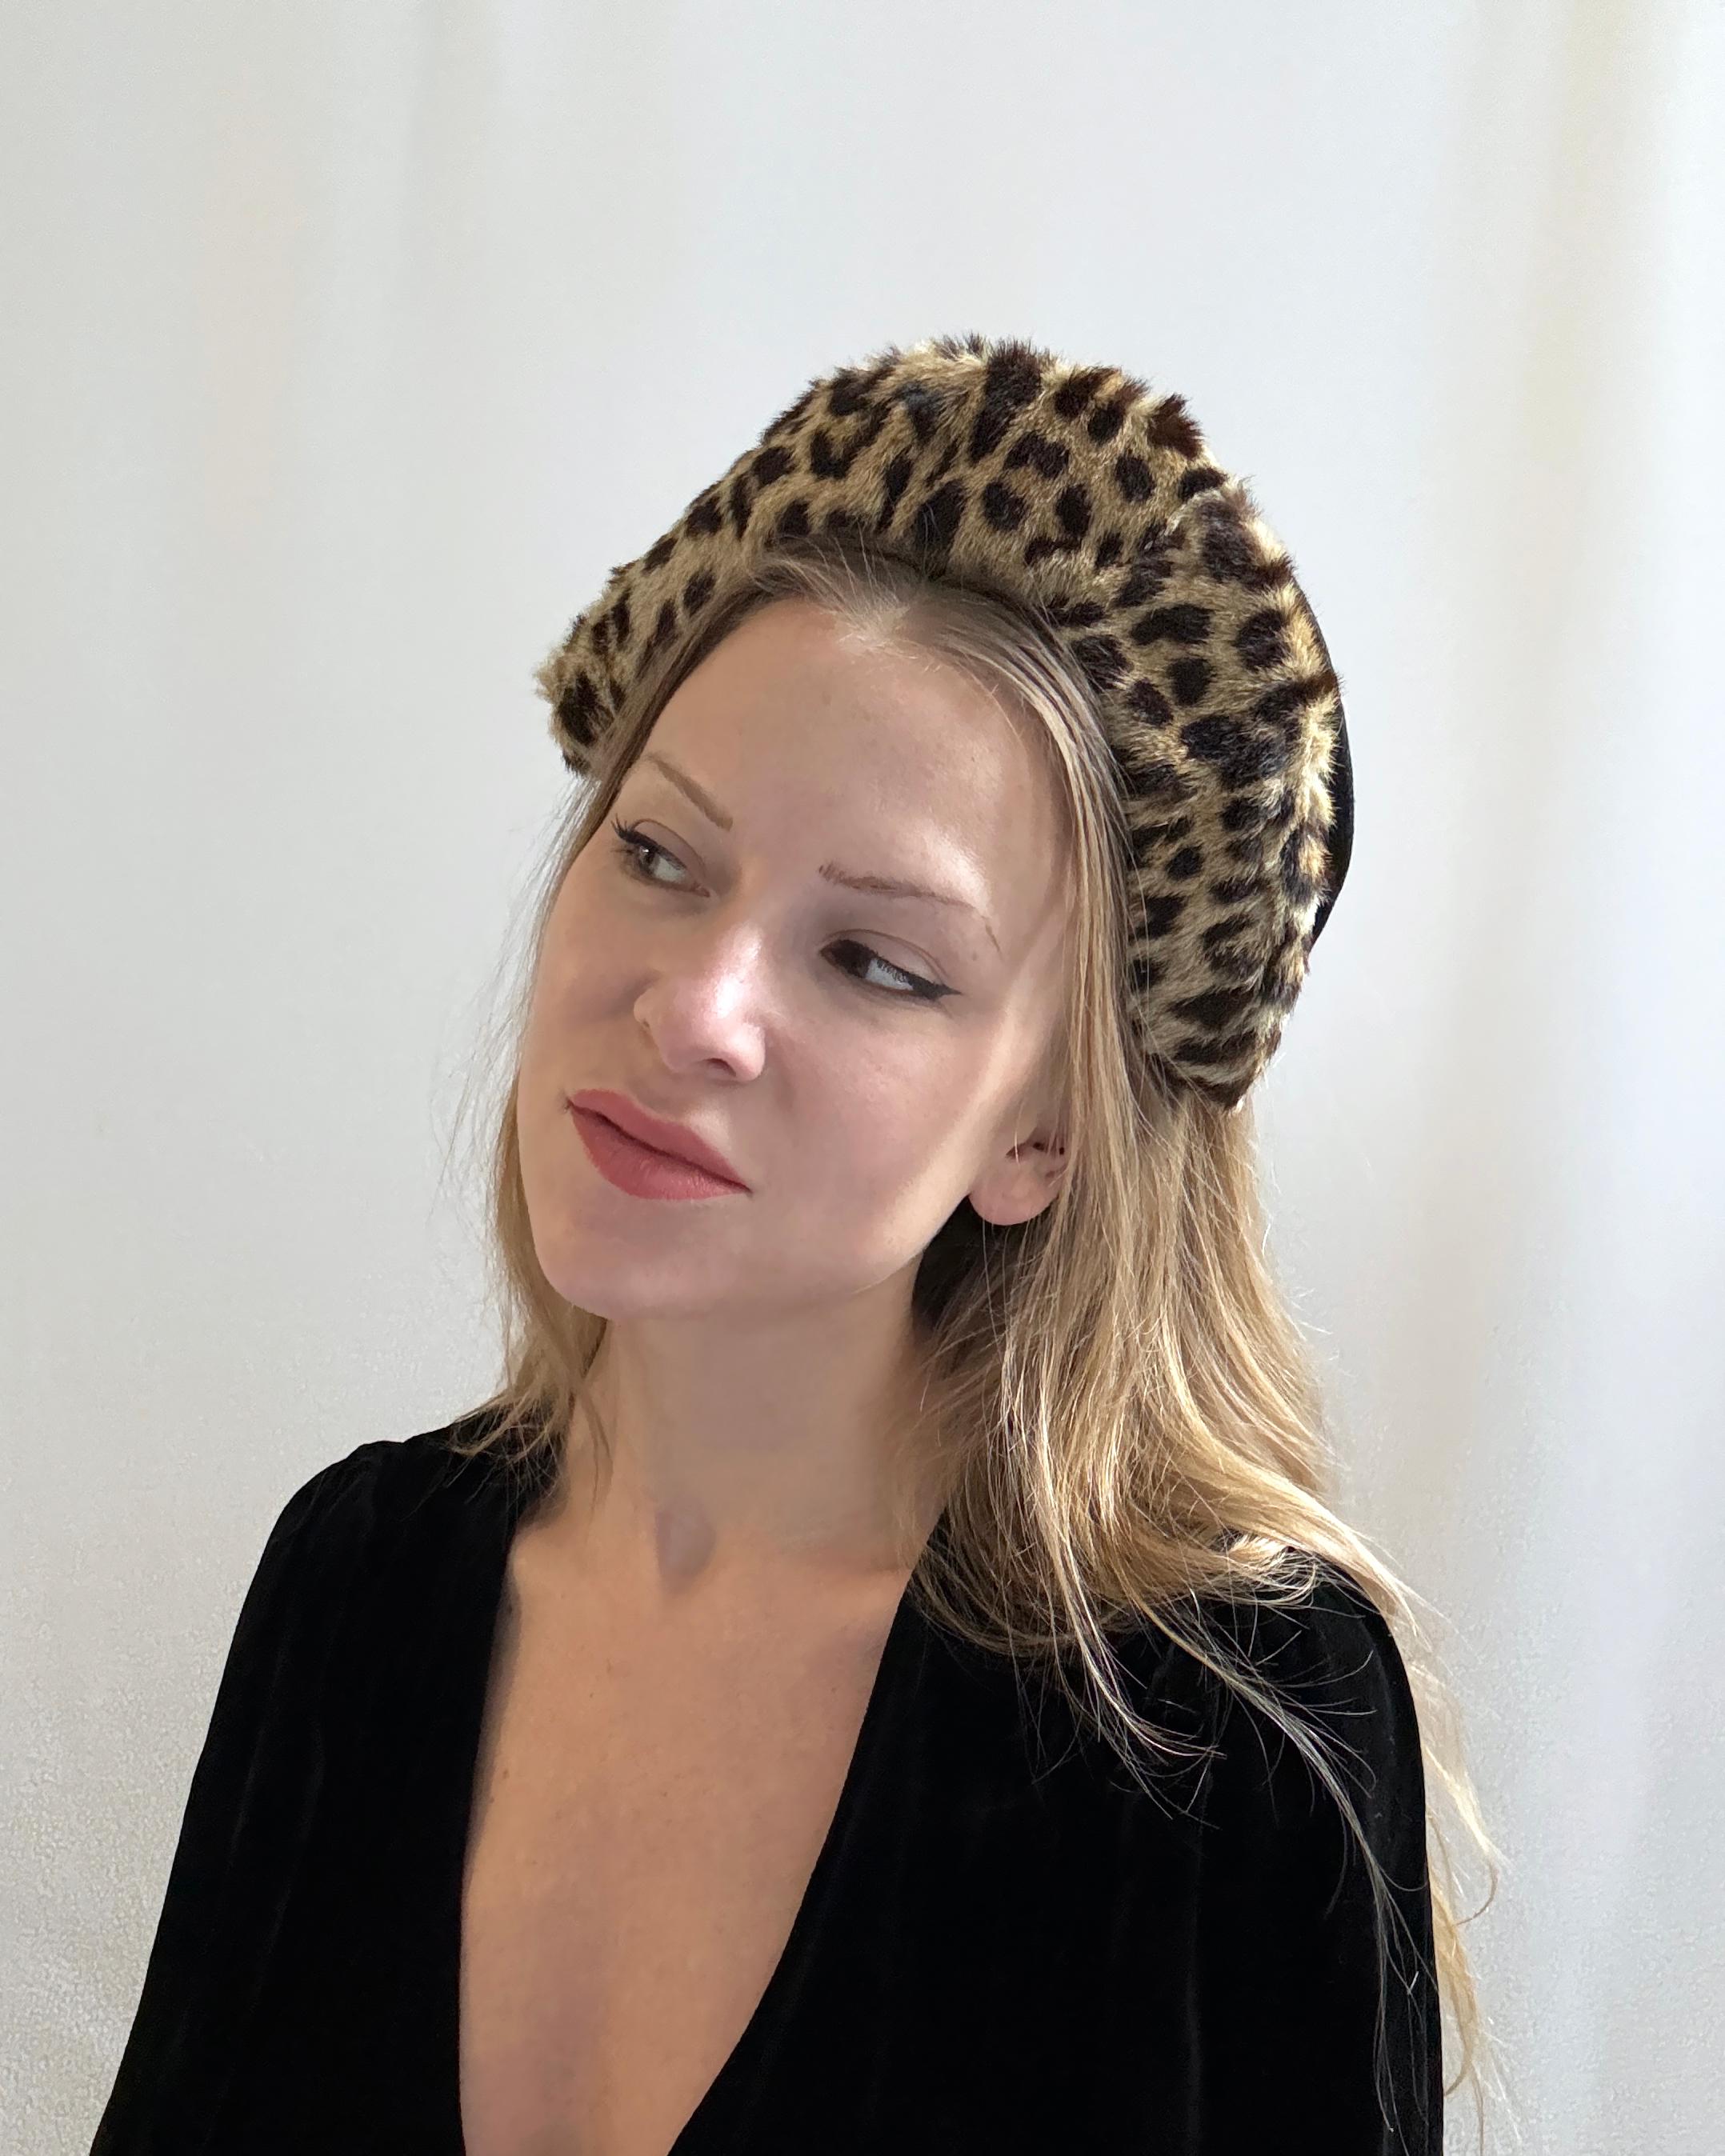 VINTAGE 1950s LEOPARD PRINT HEADBAND HAT In Excellent Condition For Sale In New York, NY